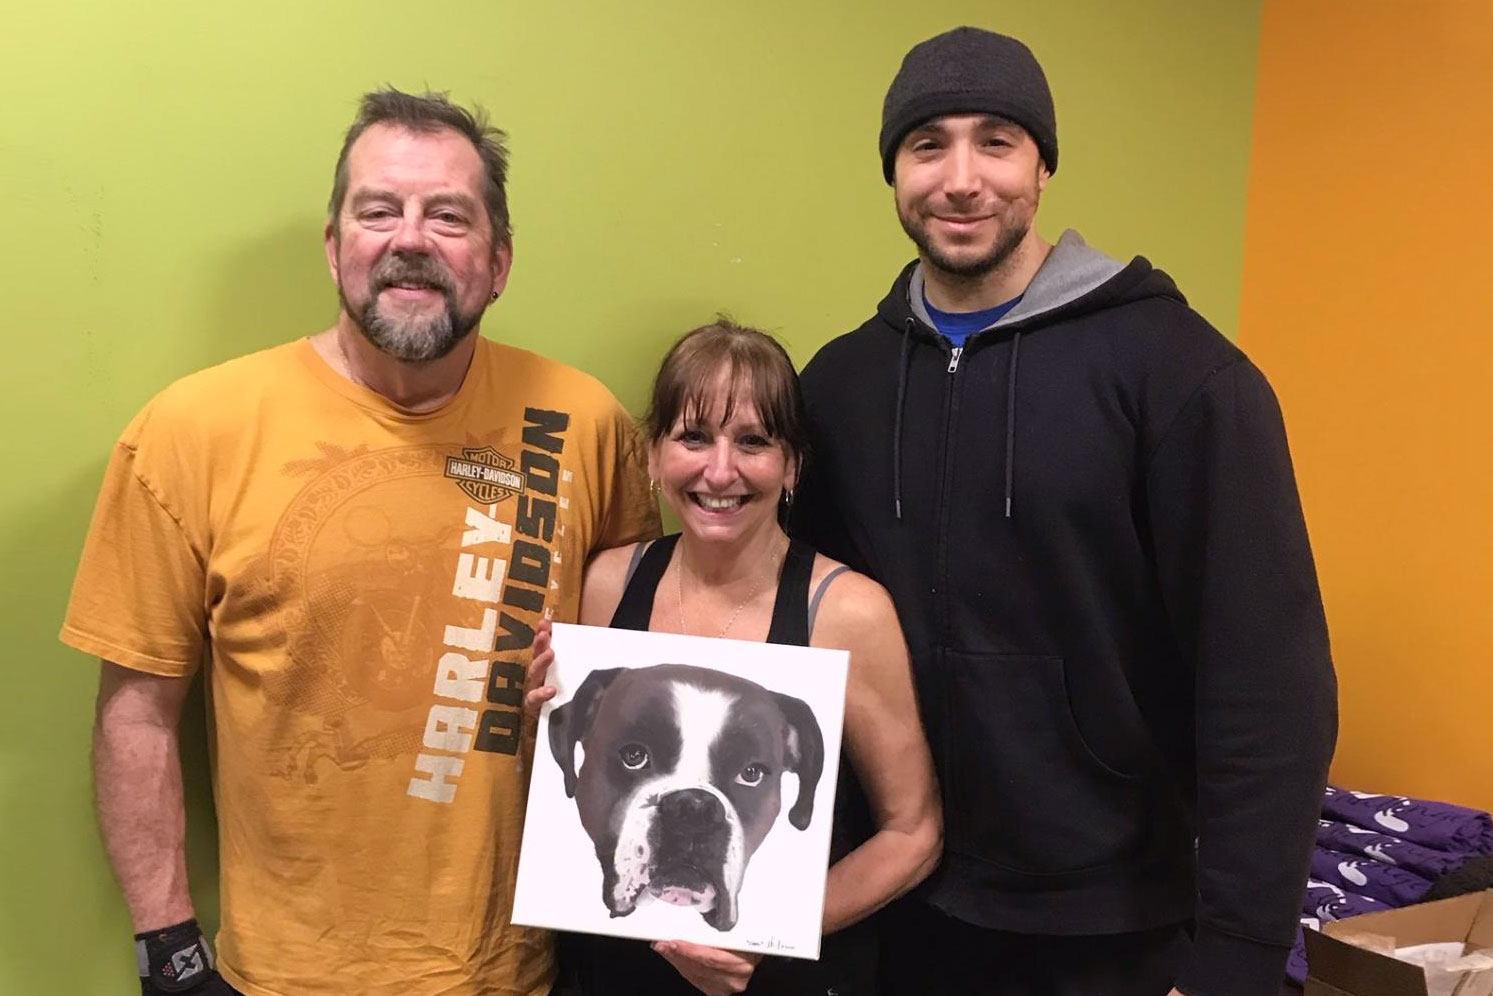 Jaymie posing with her husband, Ralph, and trainer, Daniel, holding a large photo of her dog.